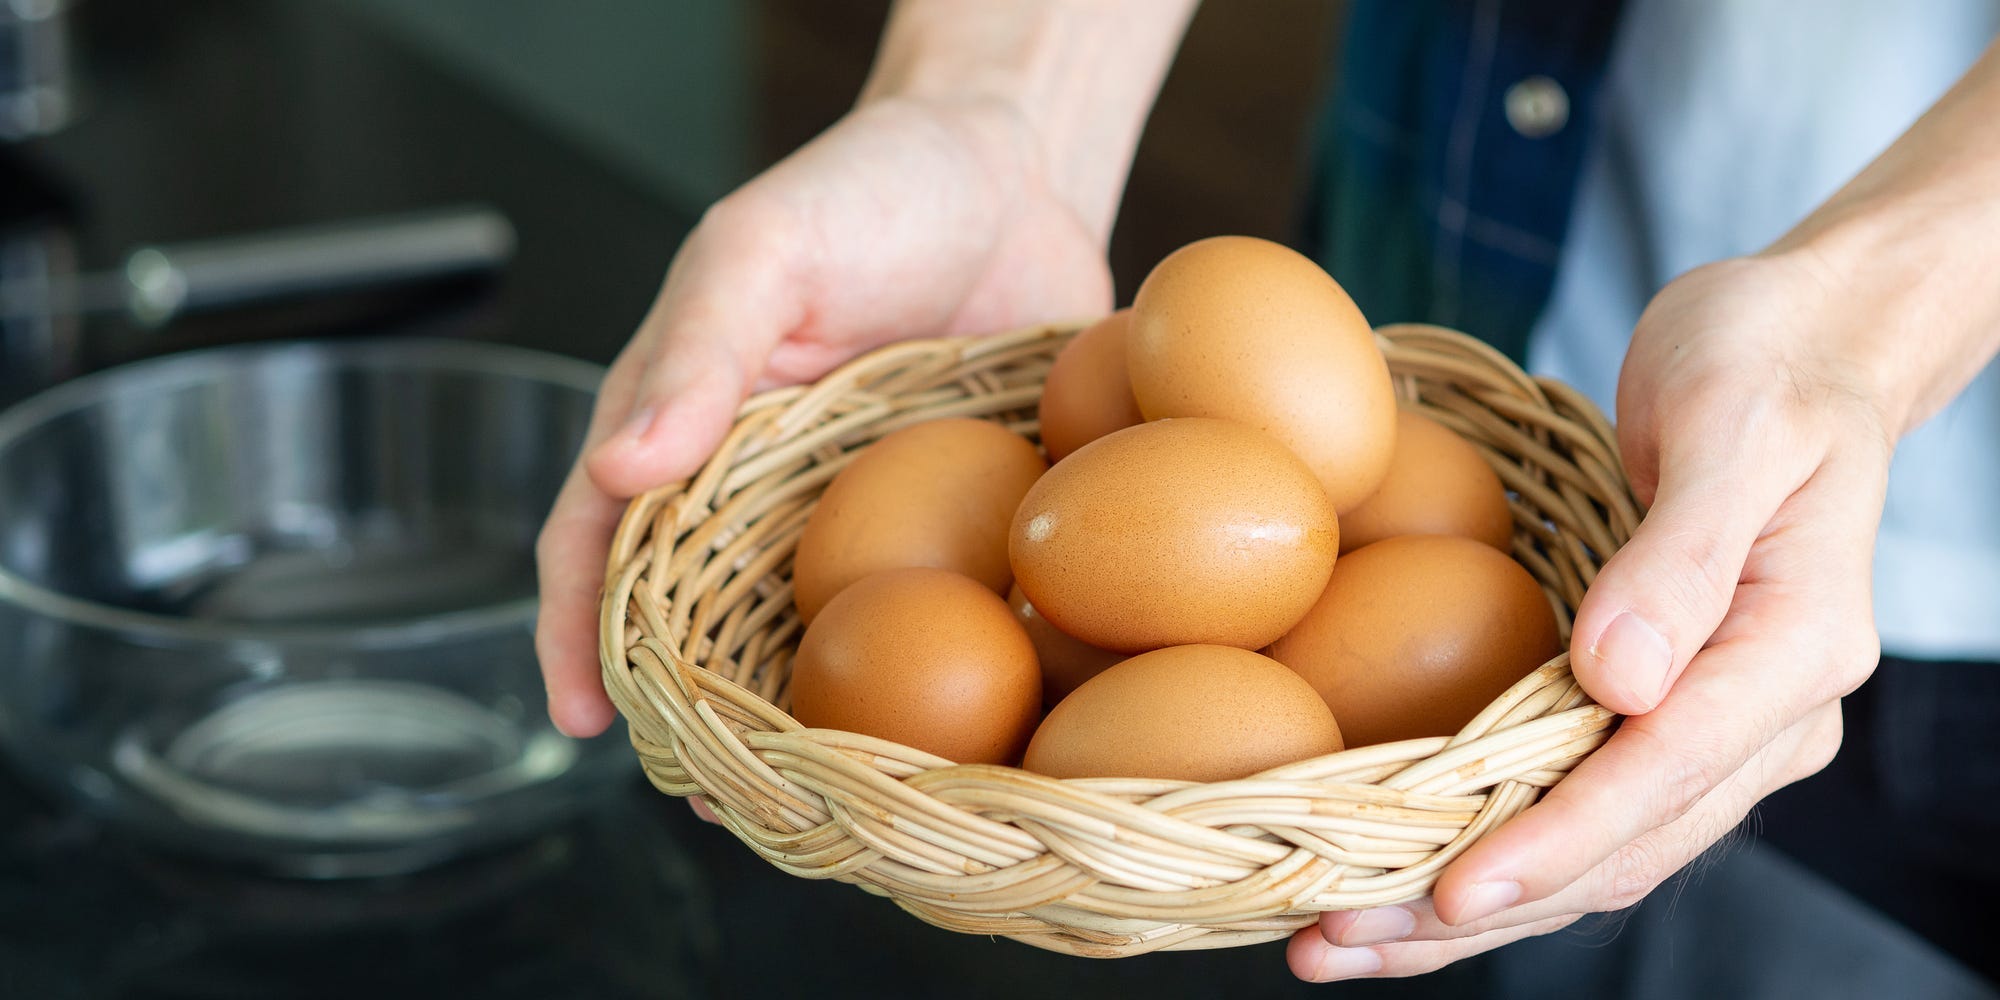 A person holds a basket of brown eggs between their hands.